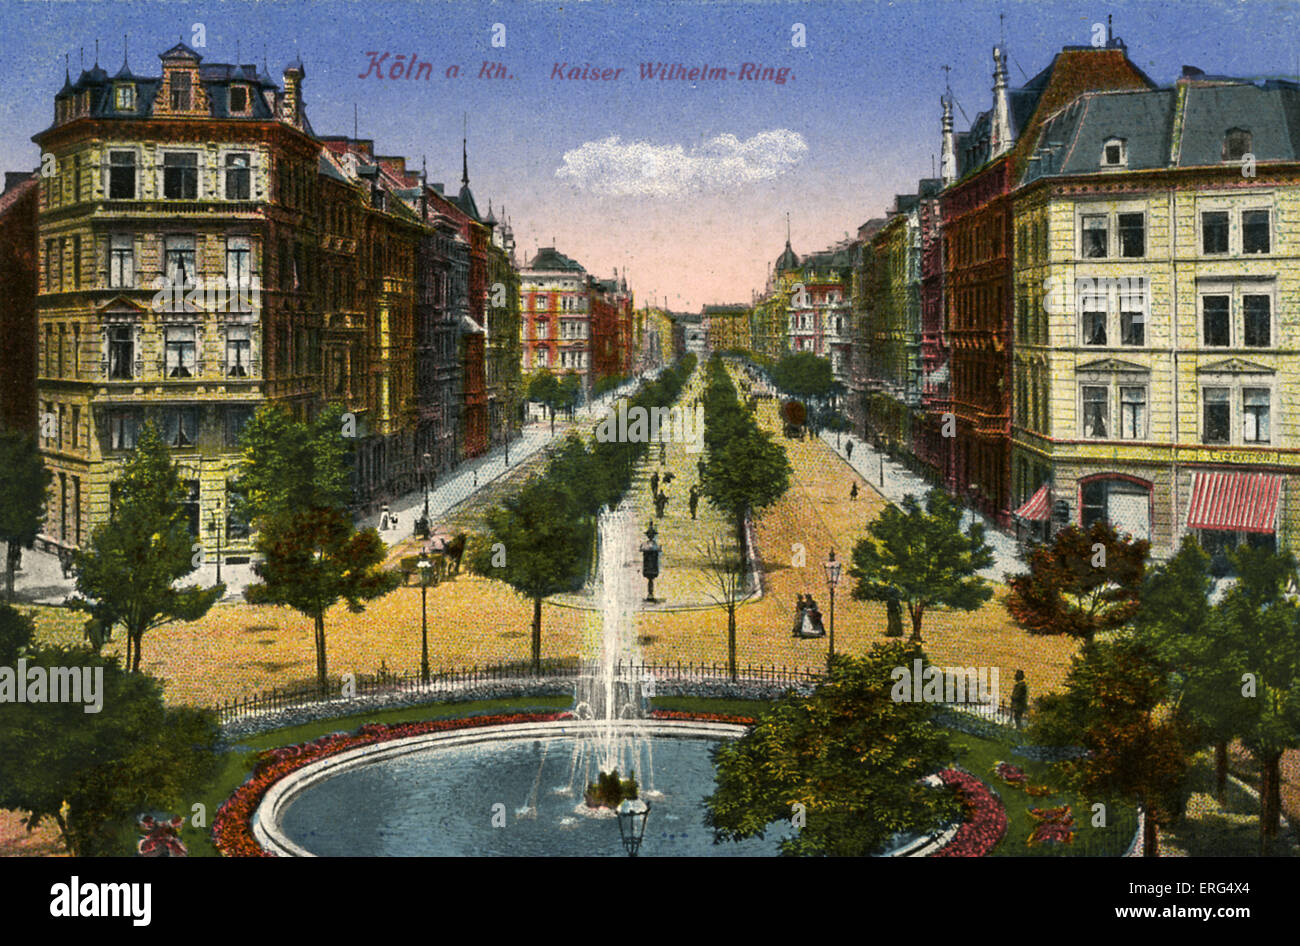 Cologne, Germany, early 20th century. Kaiser Wilhelm-Ring. Postcard. Stock Photo